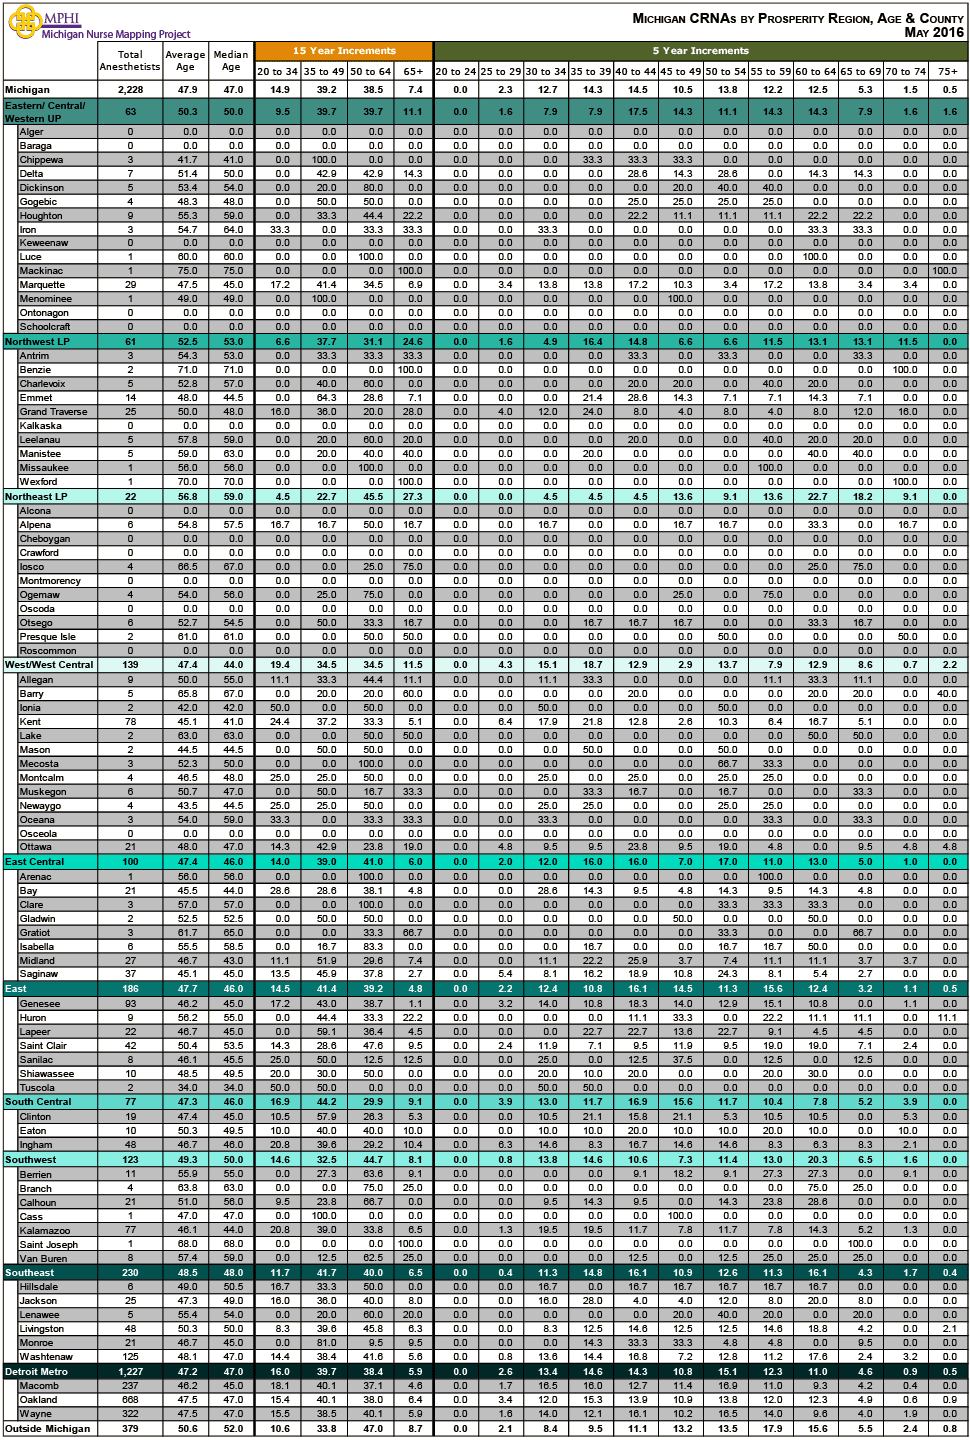 table depicting Michigan's Certified Registered Nurse Anesthetists by age groups, county and prosperity regions in 2016